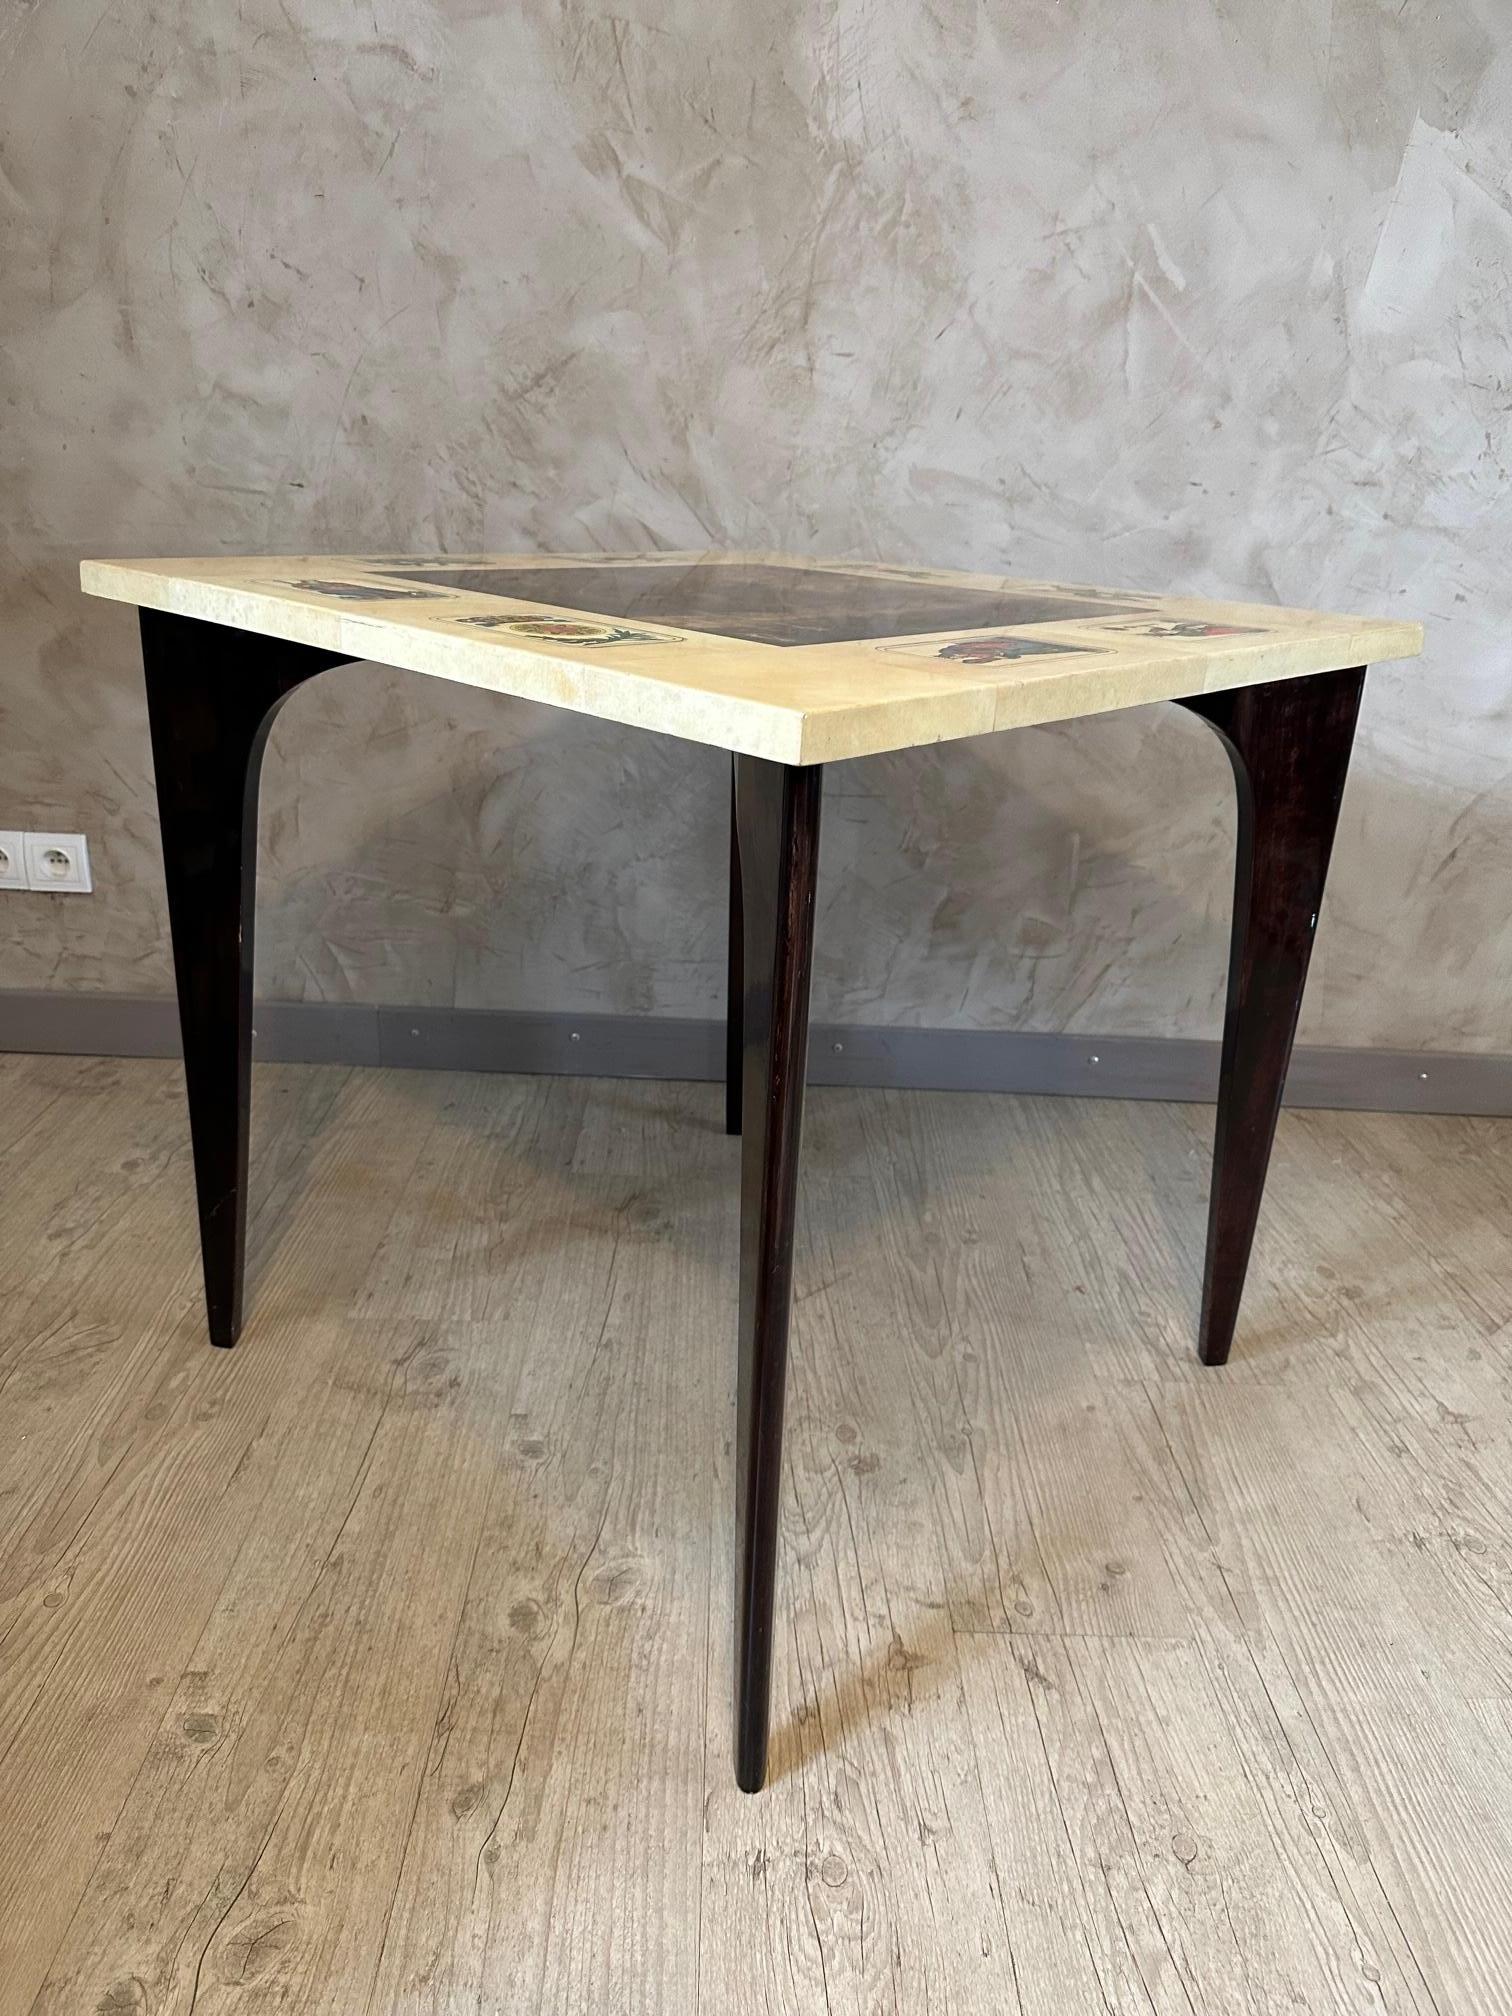 20th century Aldo Tura Lacquered Goatskin and Walnut Table With Chairs, 1960s For Sale 12